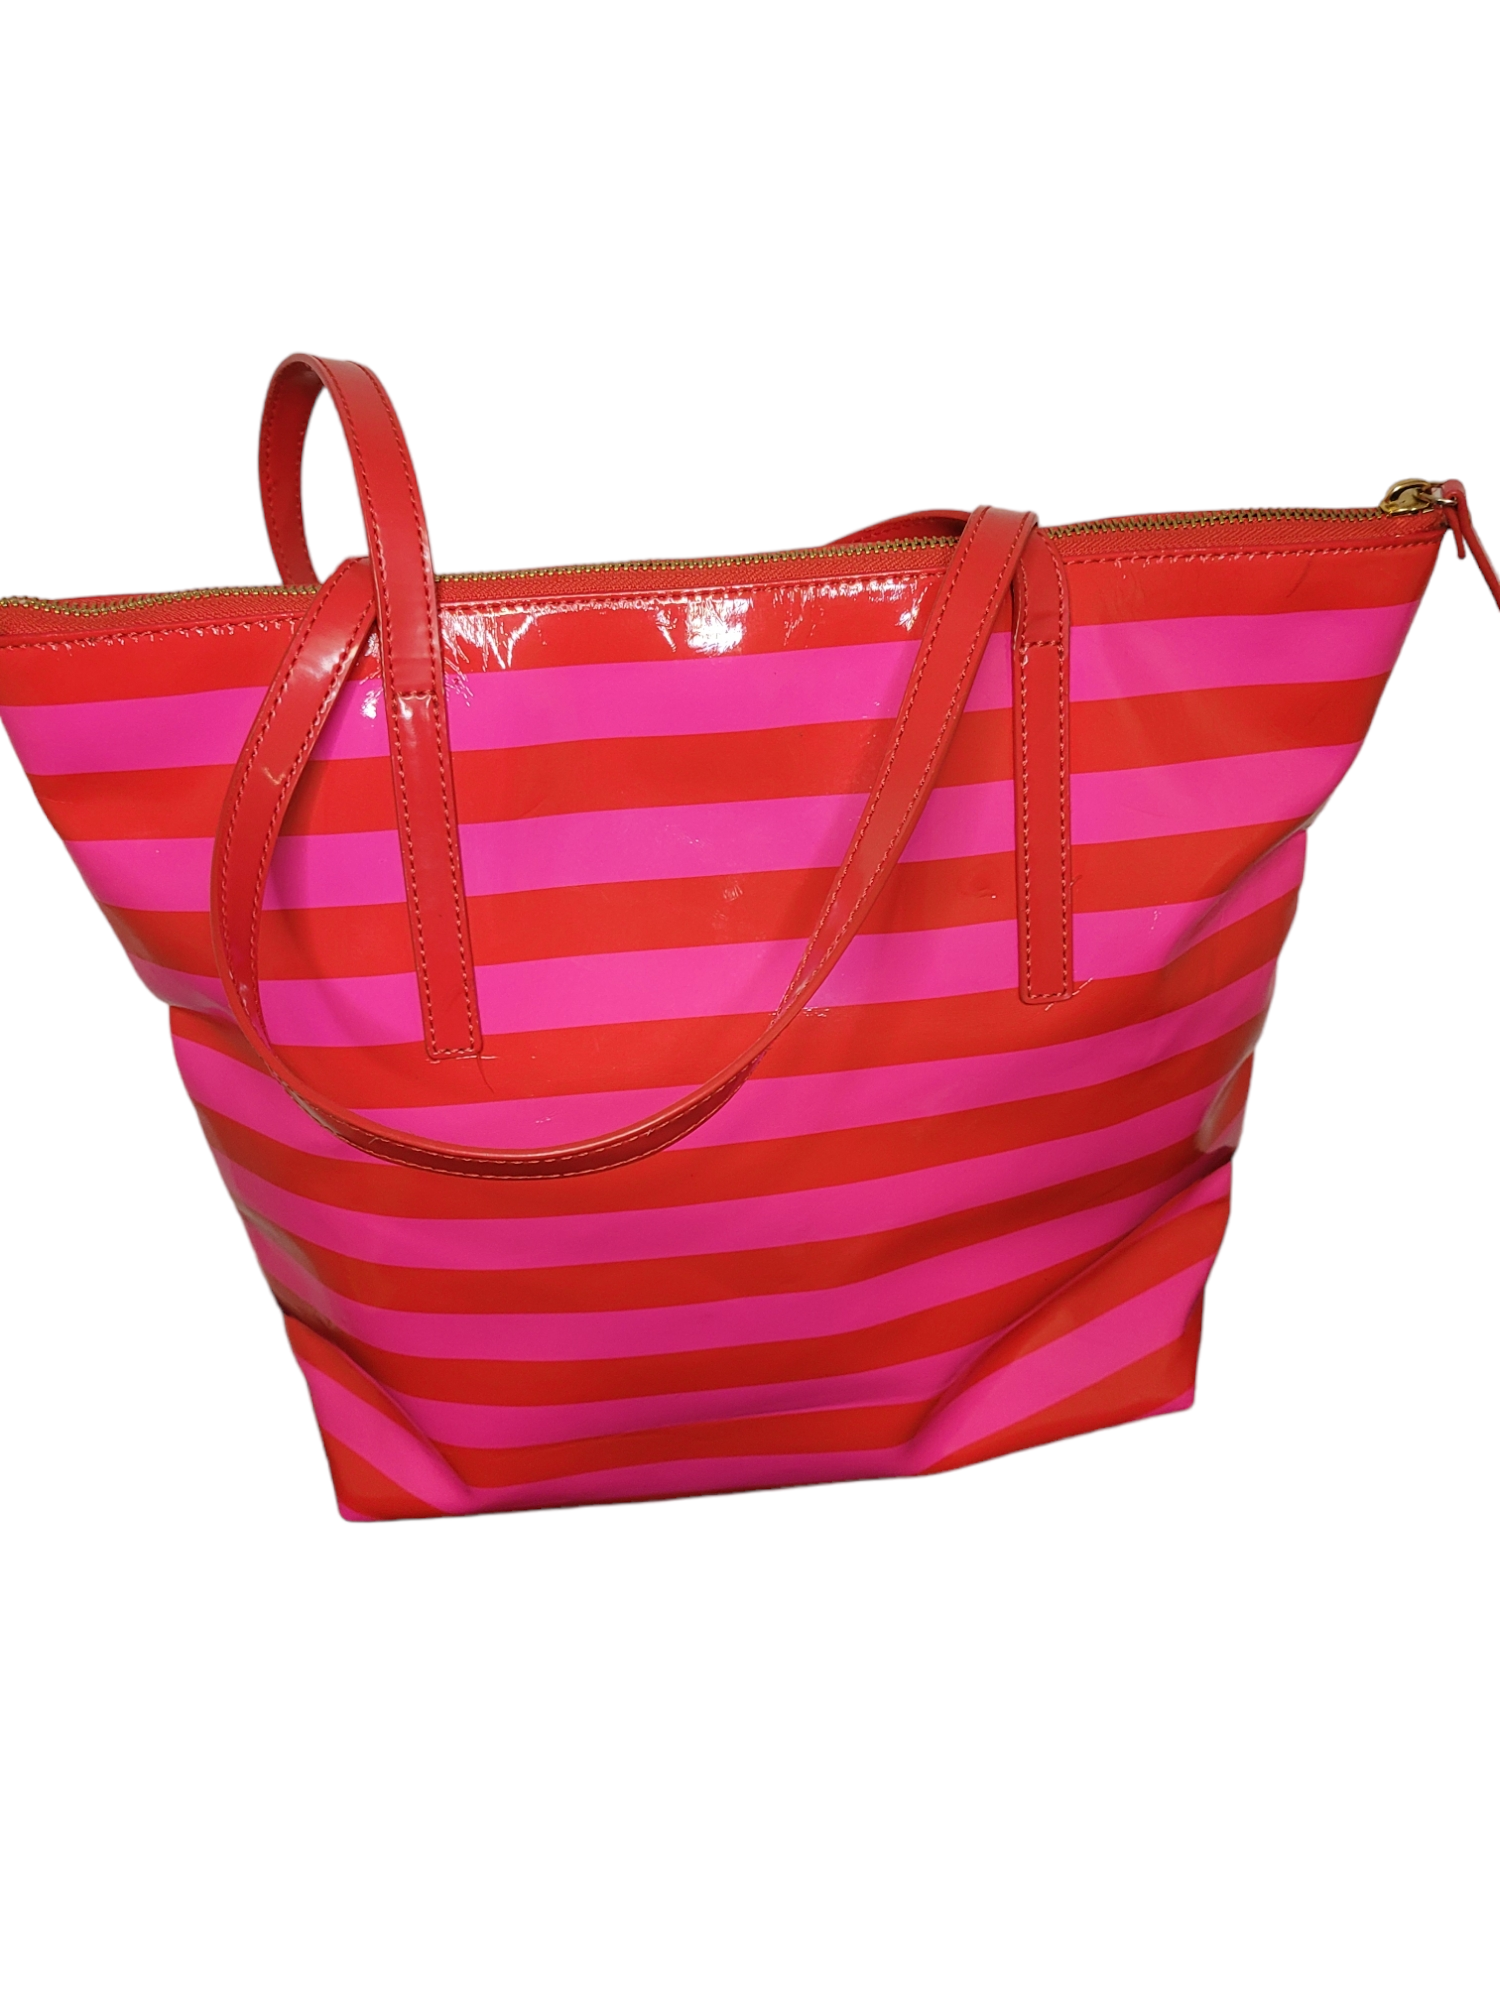 kate spade new york - Insulated Lunch Tote